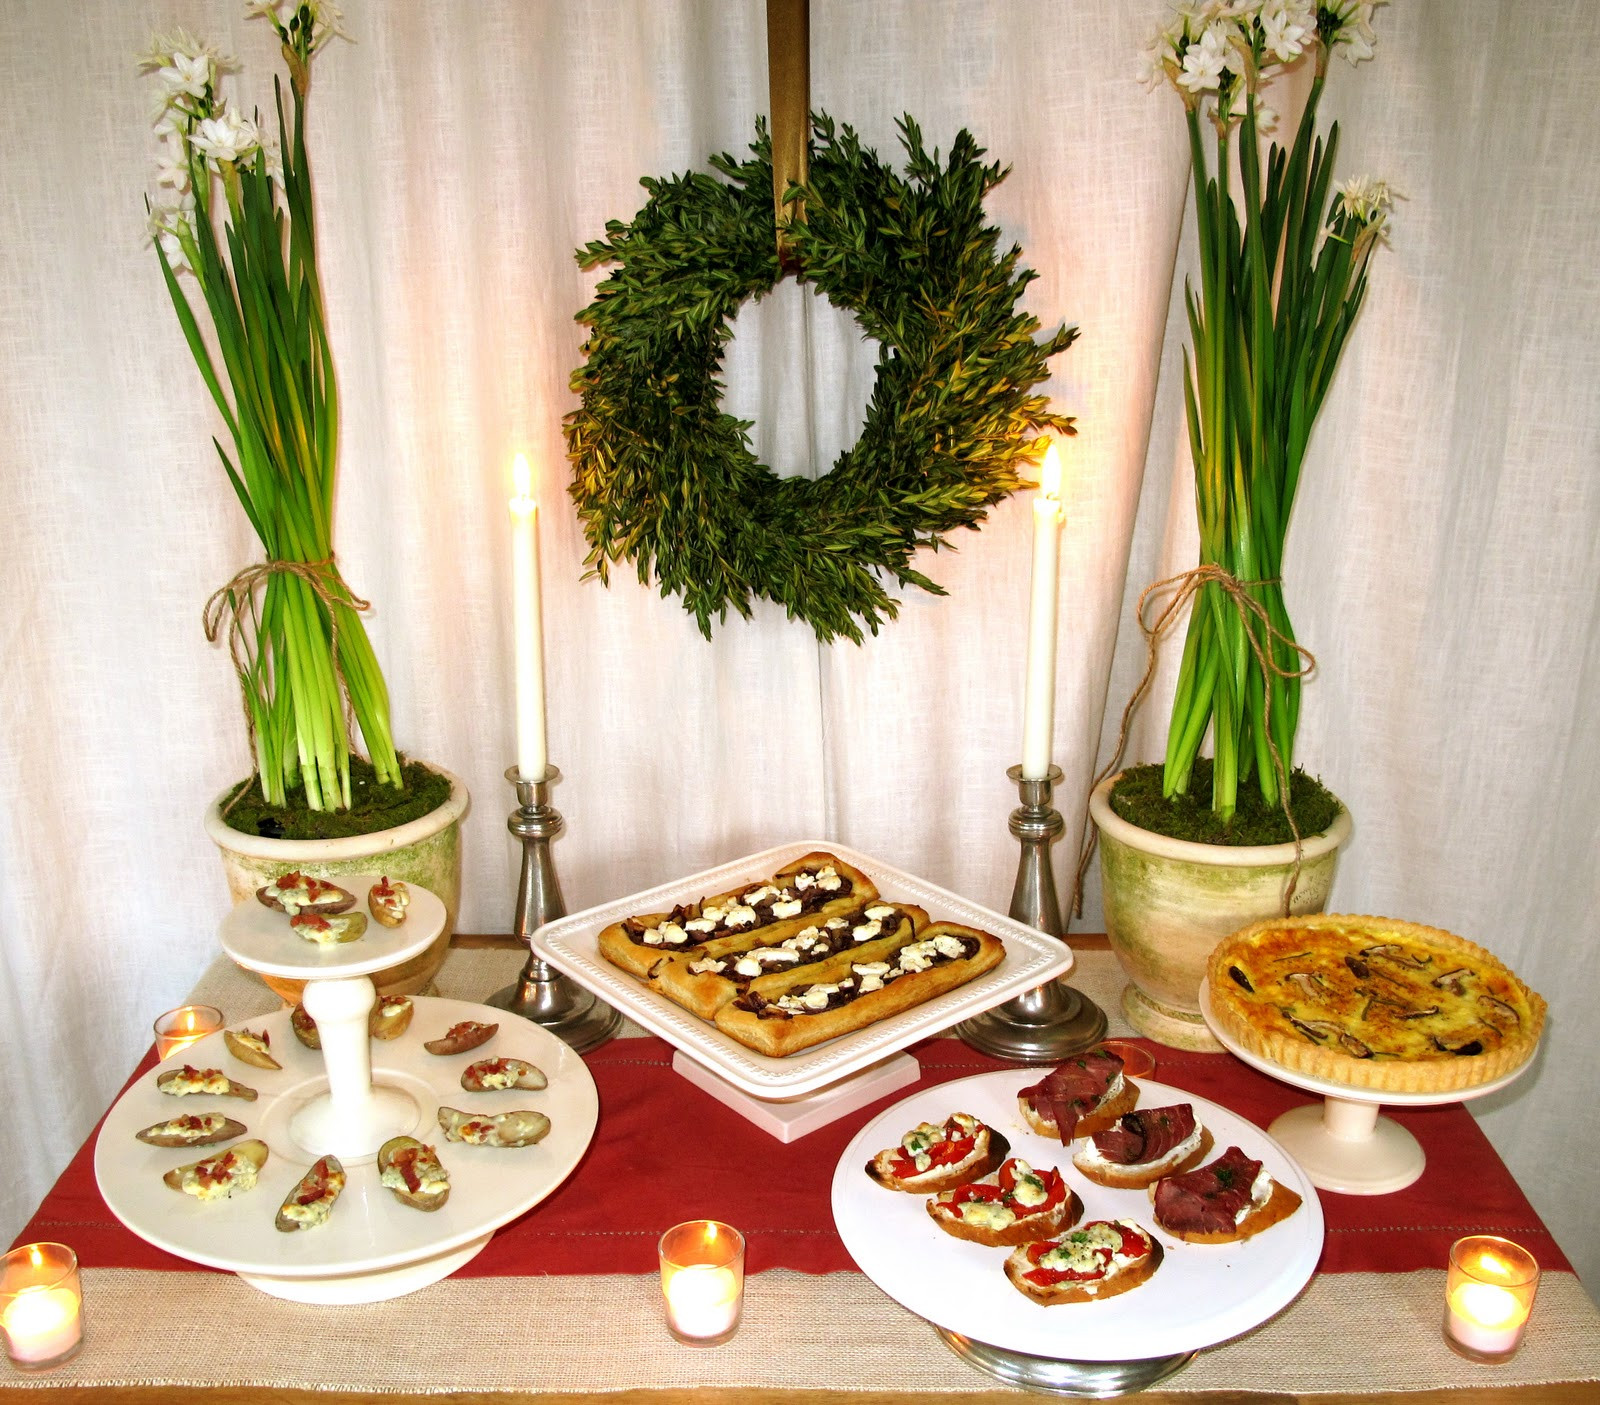 Cocktail Party Food Ideas
 Jenny Steffens Hobick Holidays Entertaining